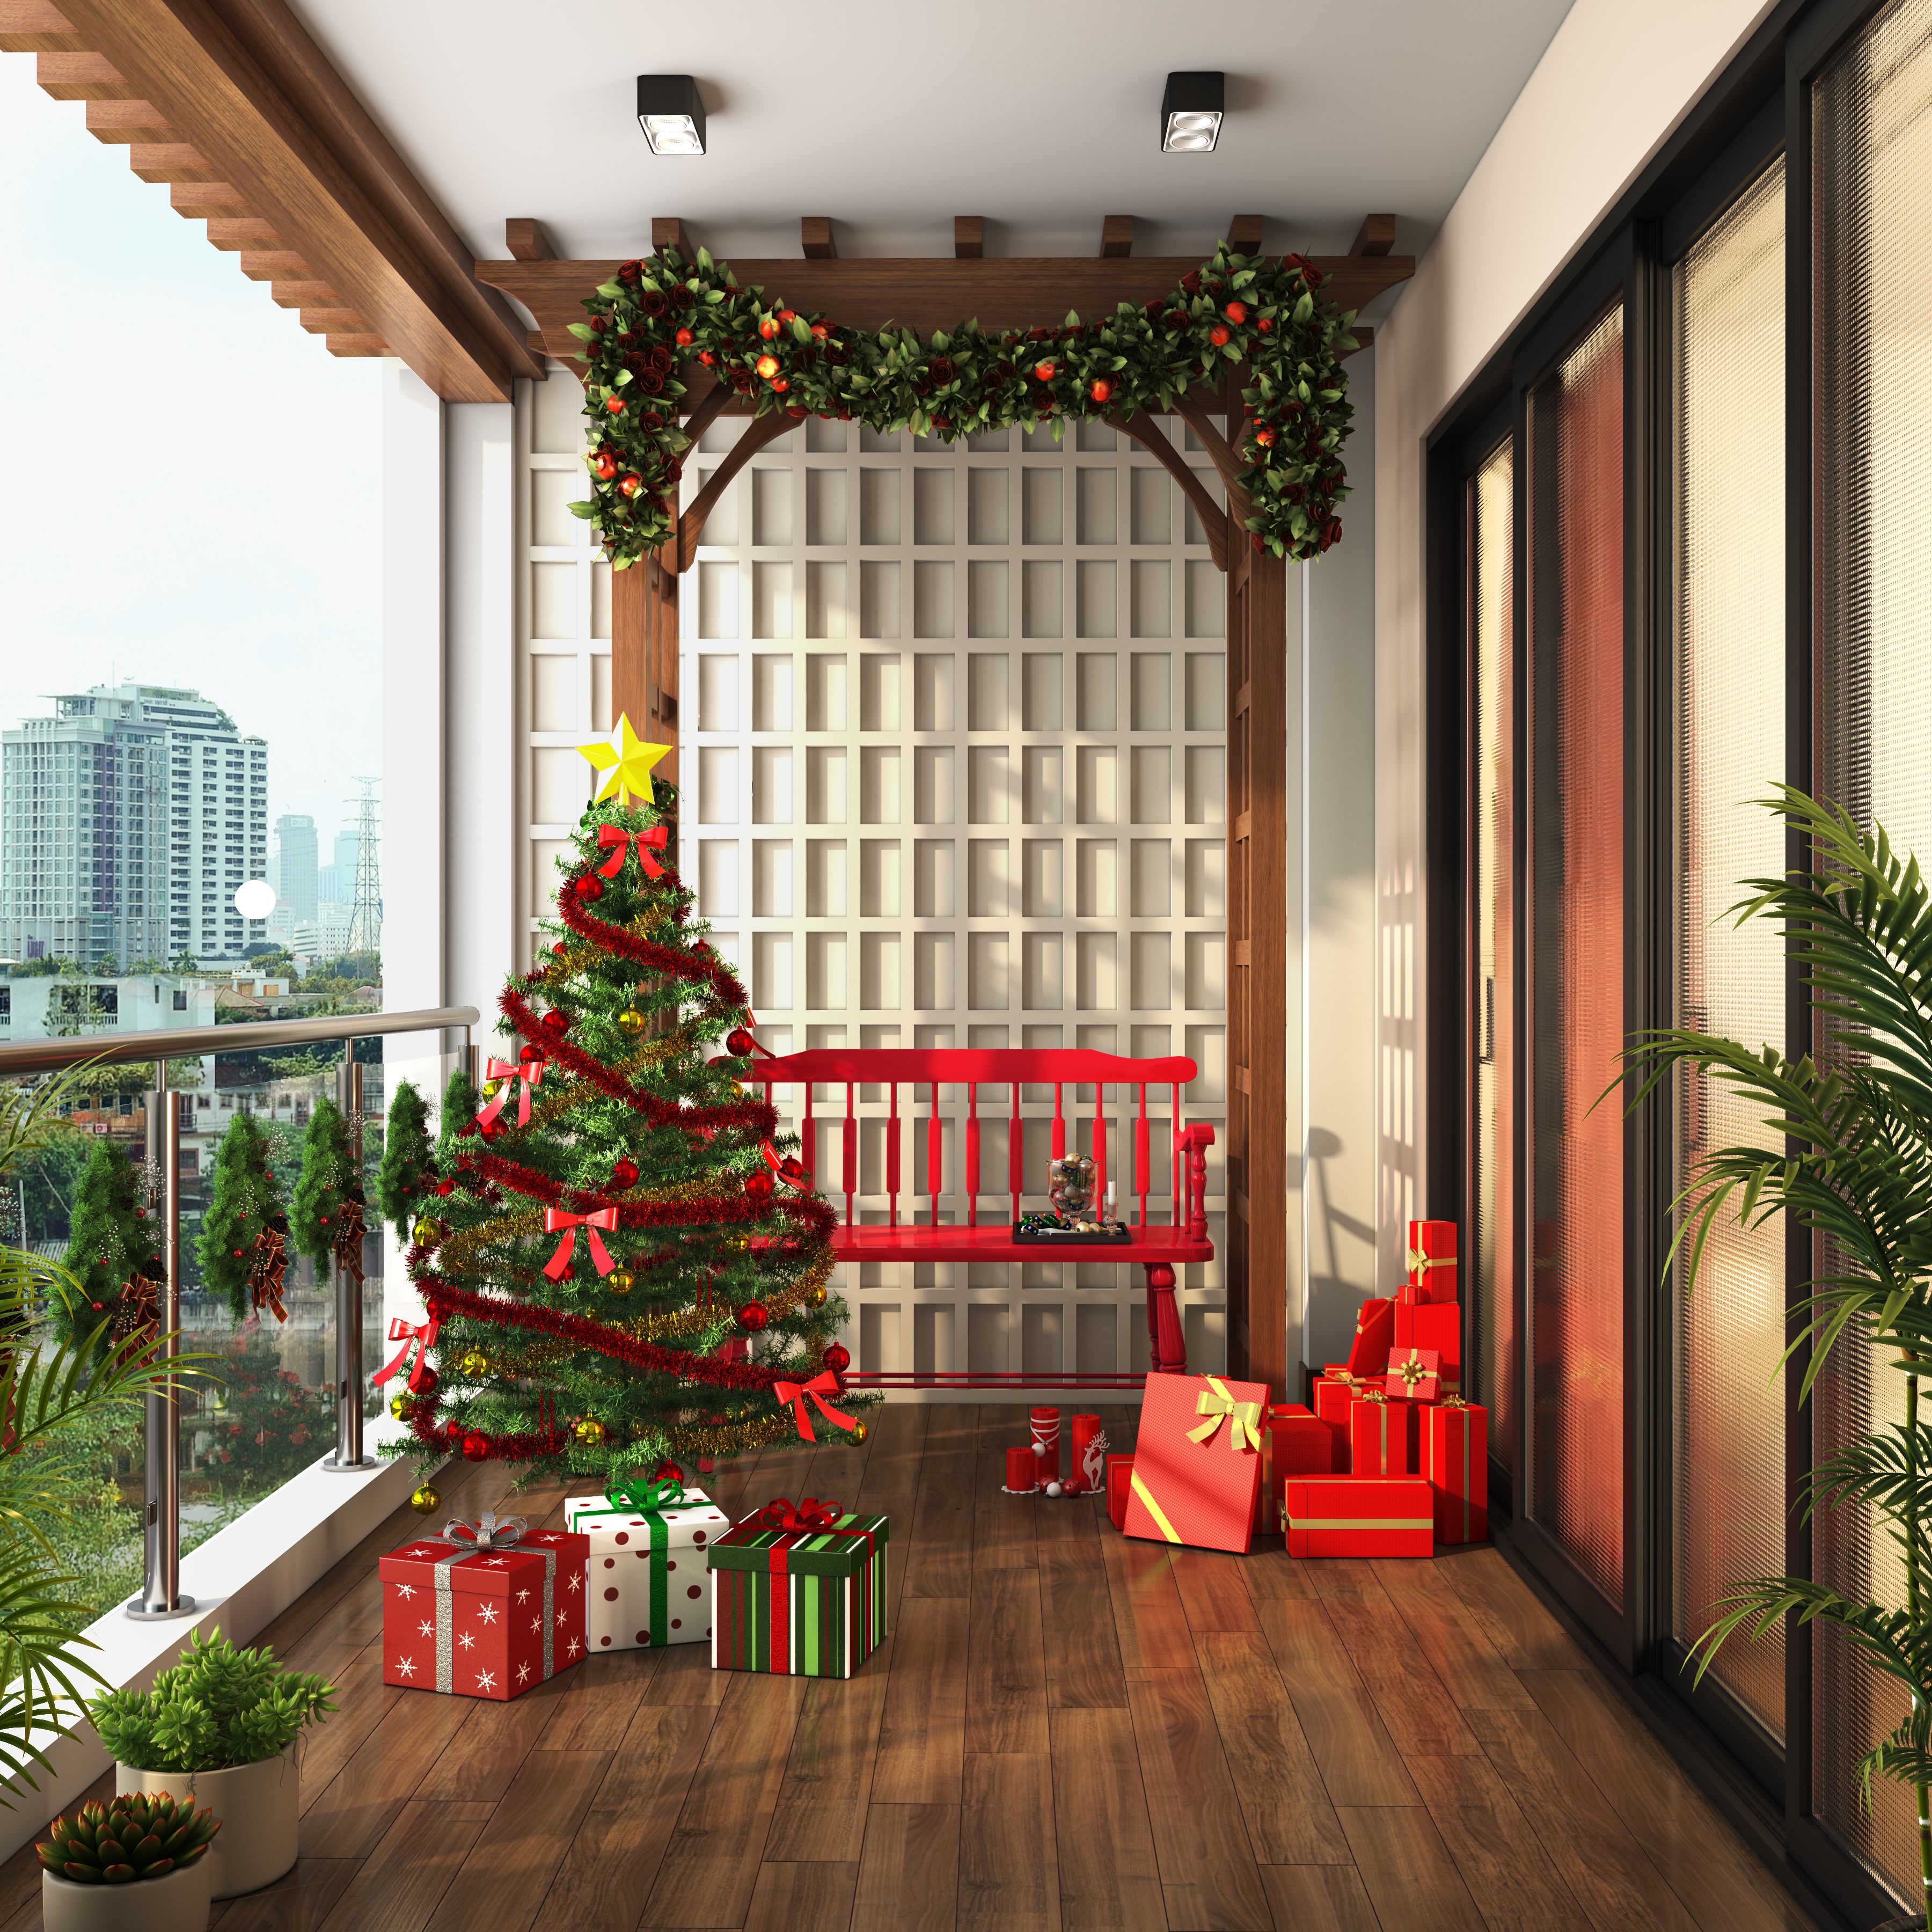 Simple Balcony With Christmas Celebration Vibes